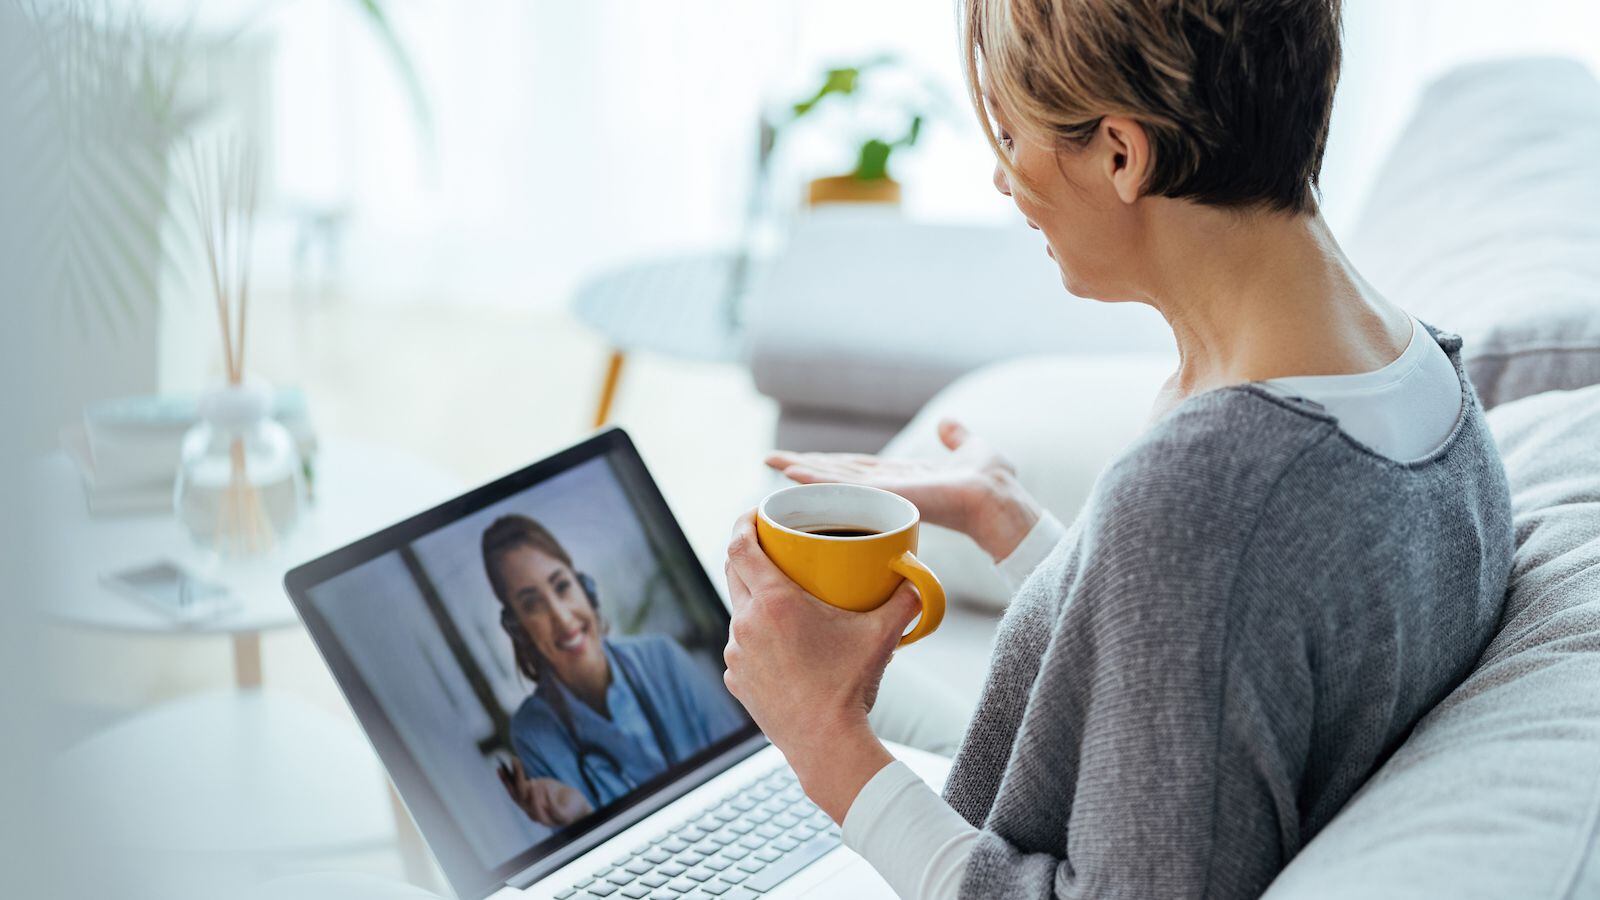 Telemedicine has made it easier for patients to get care for chronic medical conditions...